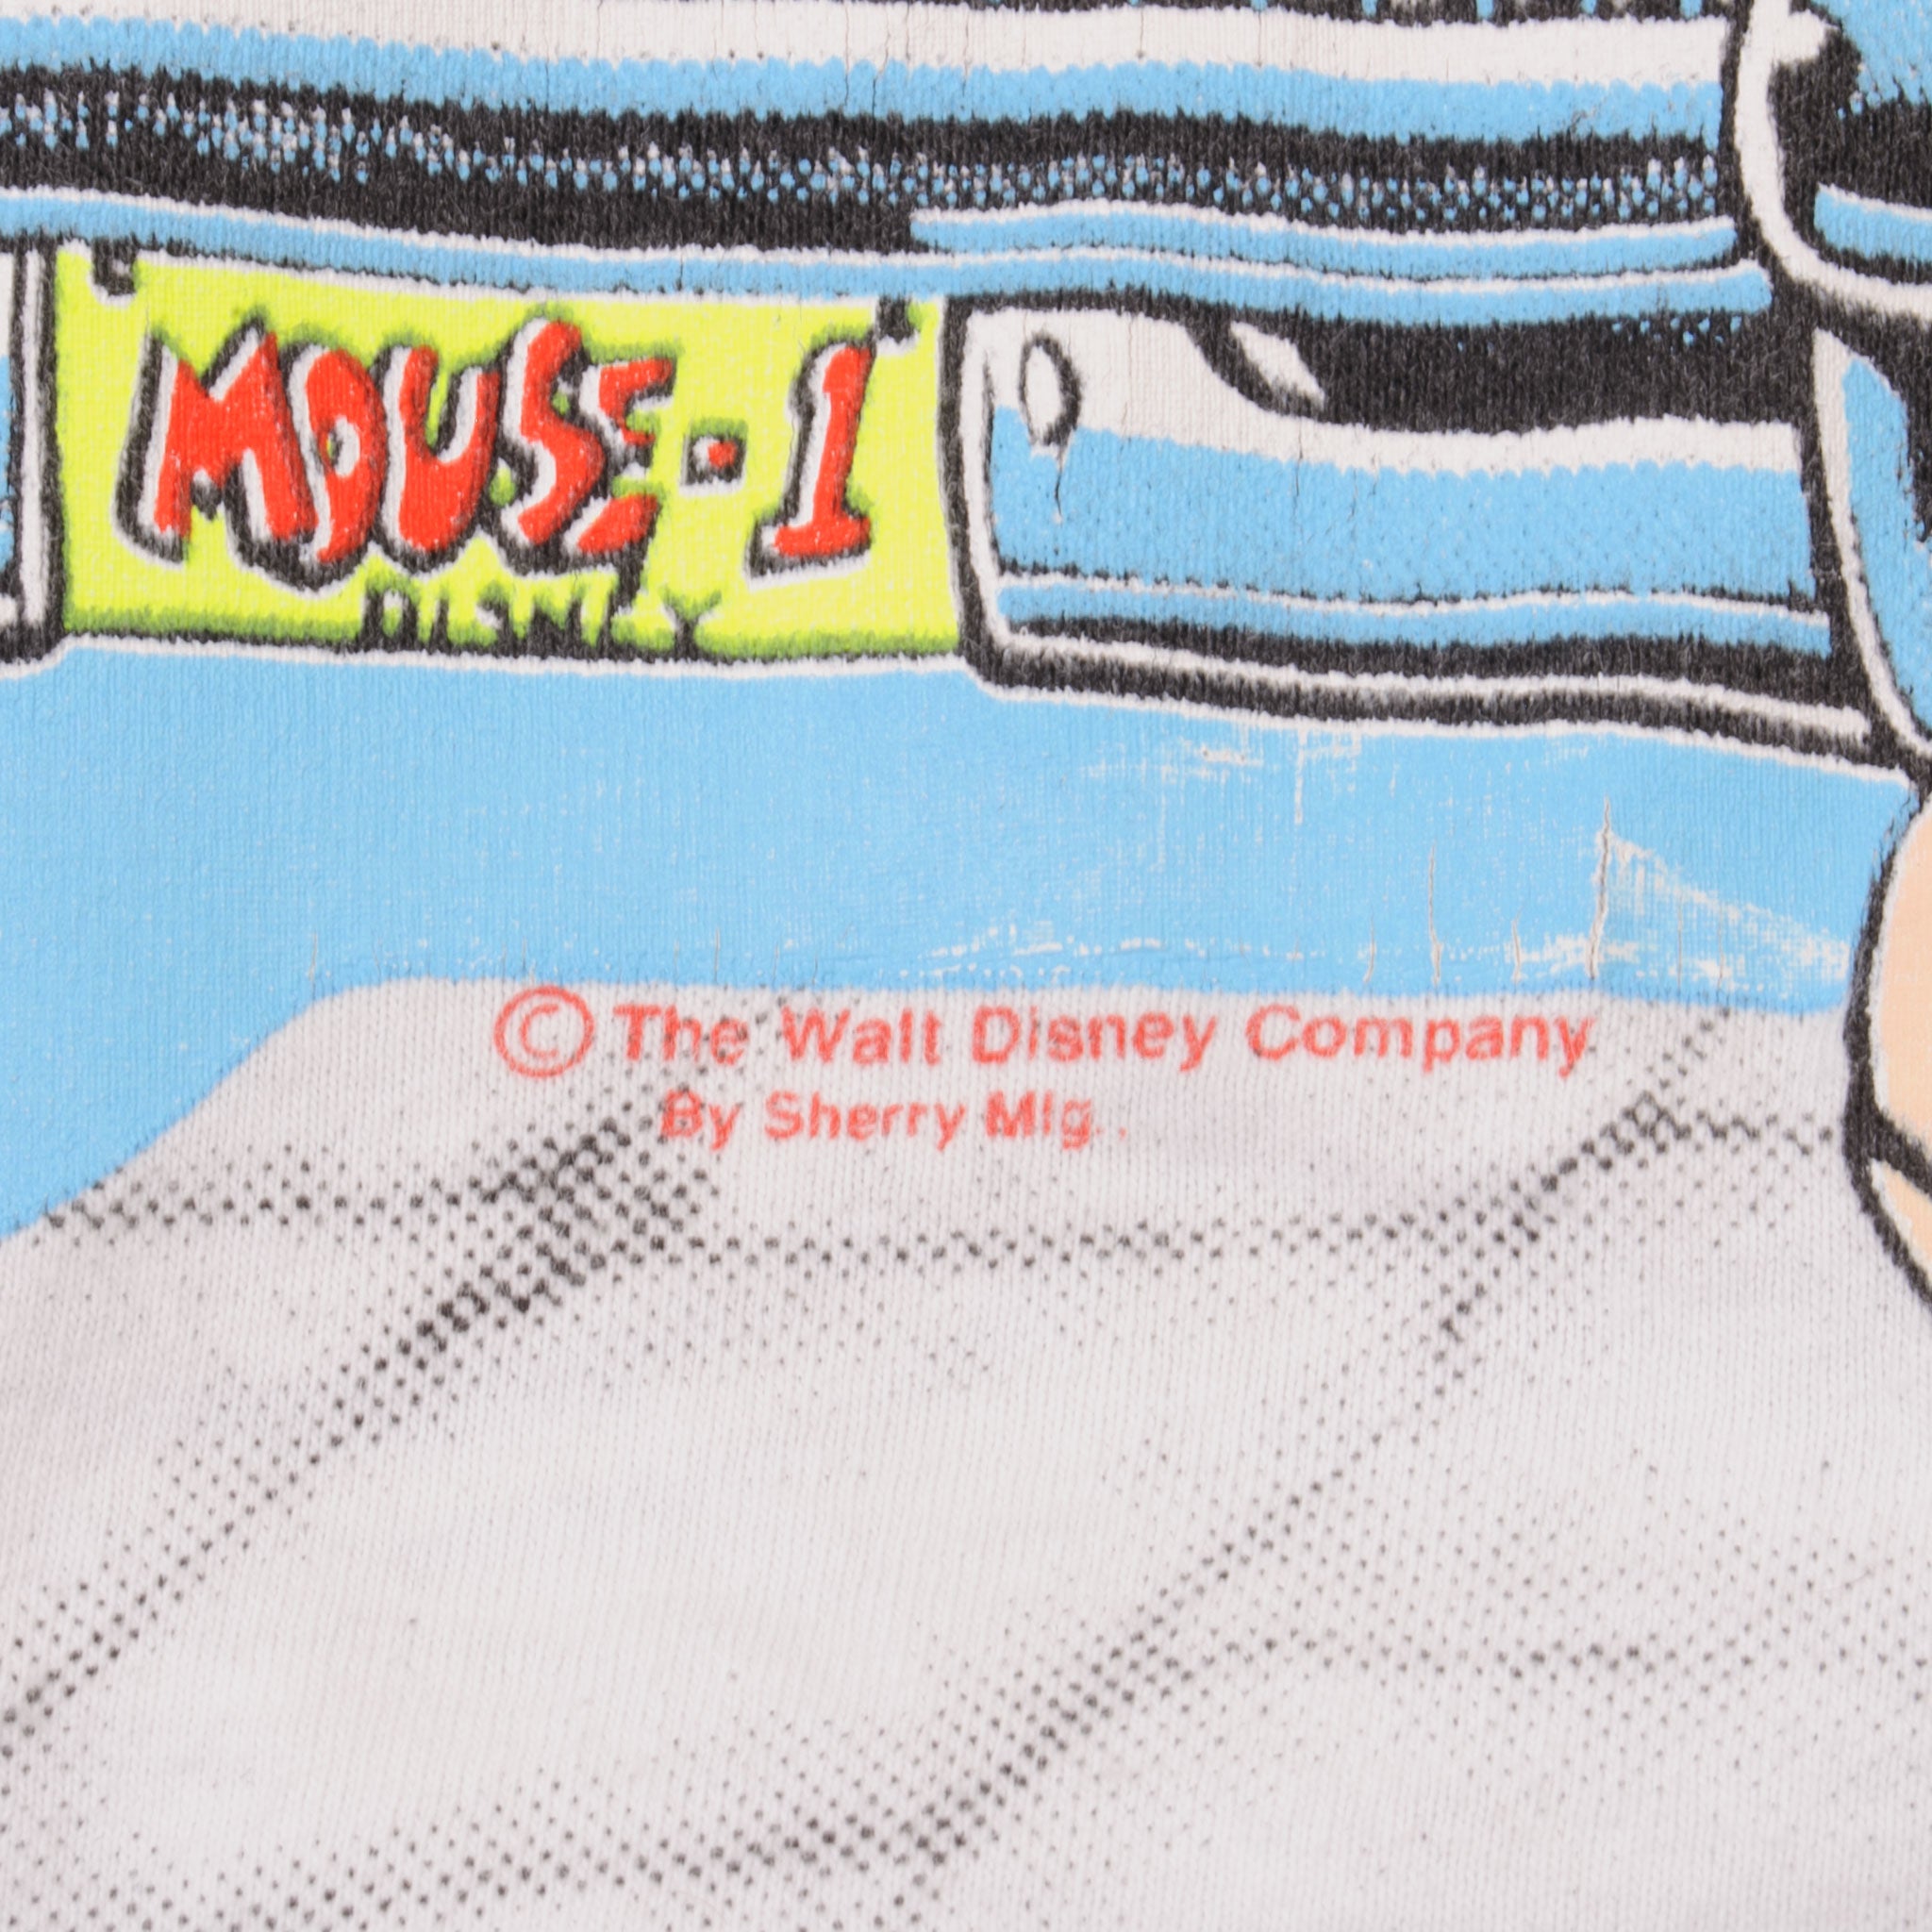 Other, Who Love Mickey Mouse Lv Tshirts Size Various Unknown If Real